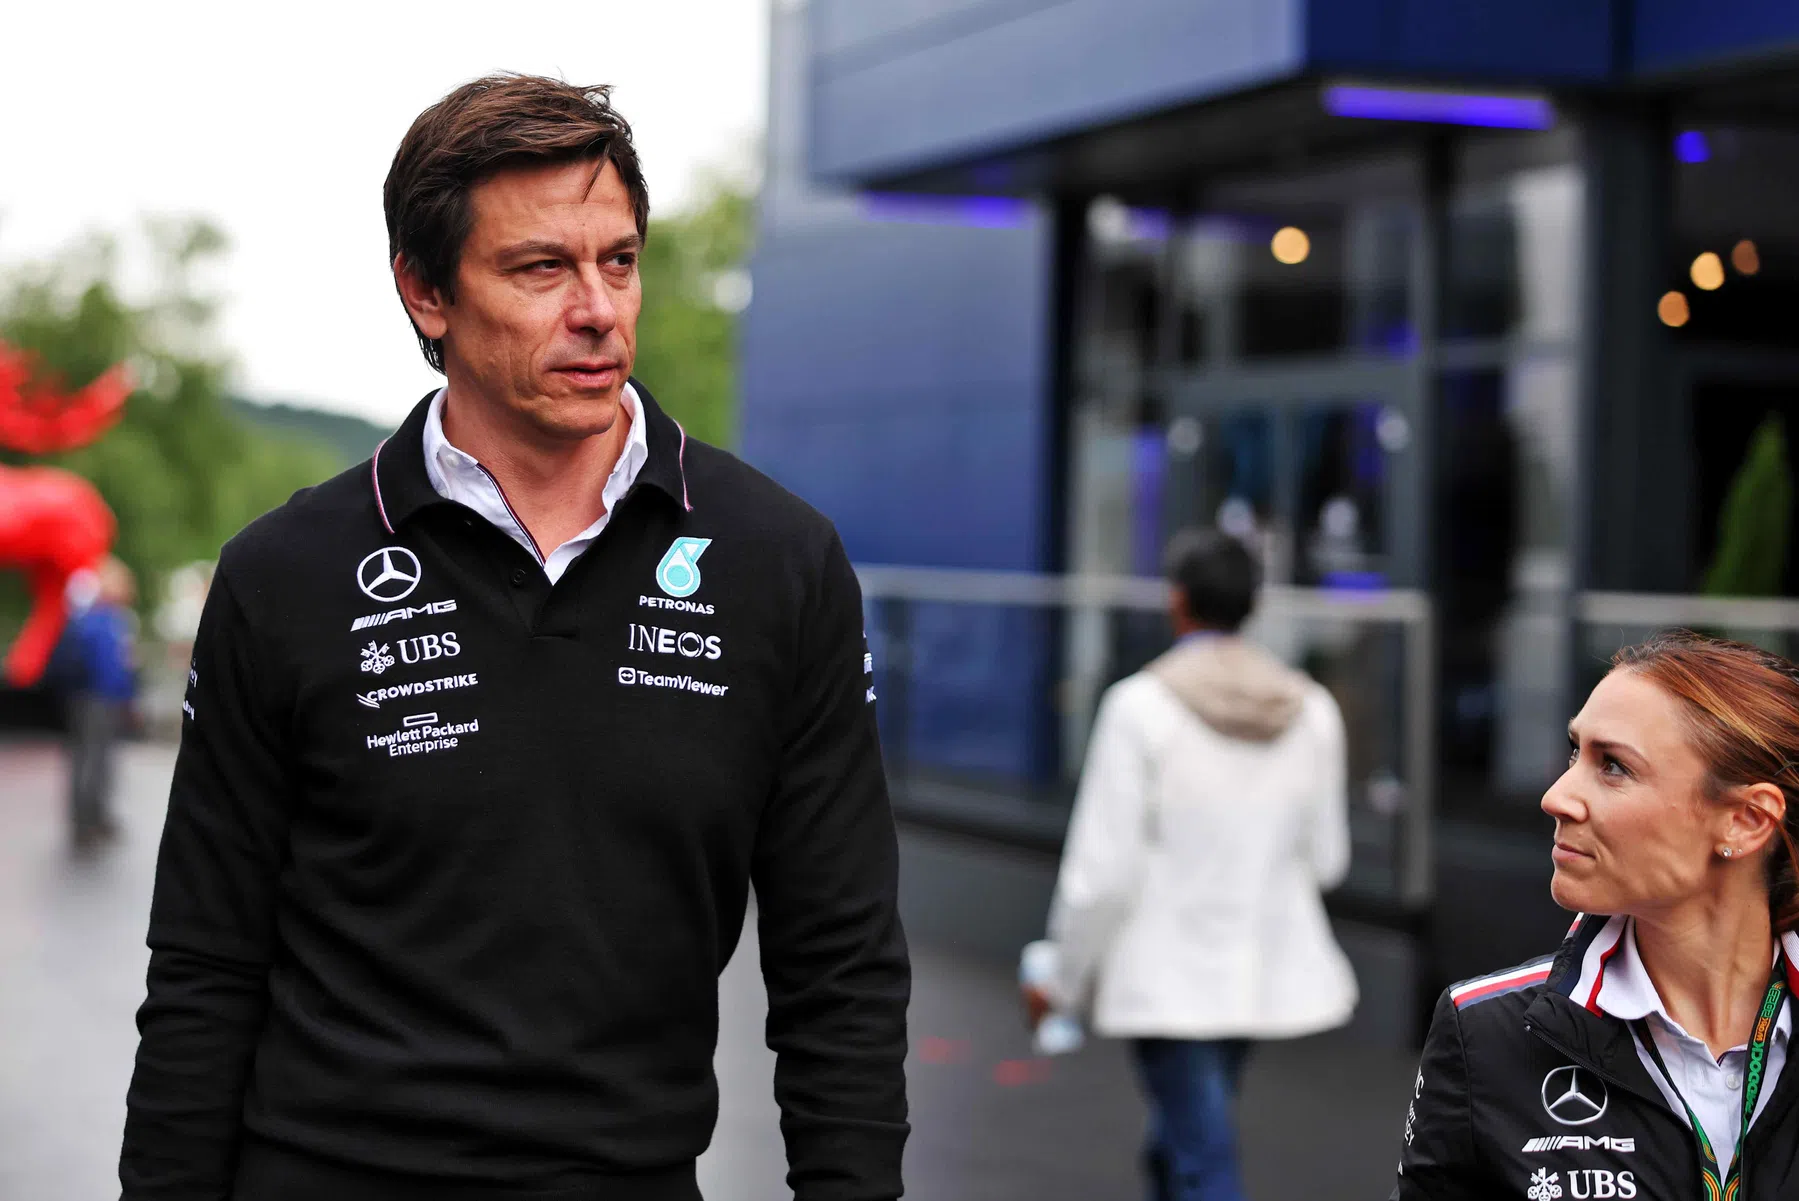 wolff's future as team boss uncertain at mercedes and row with fia